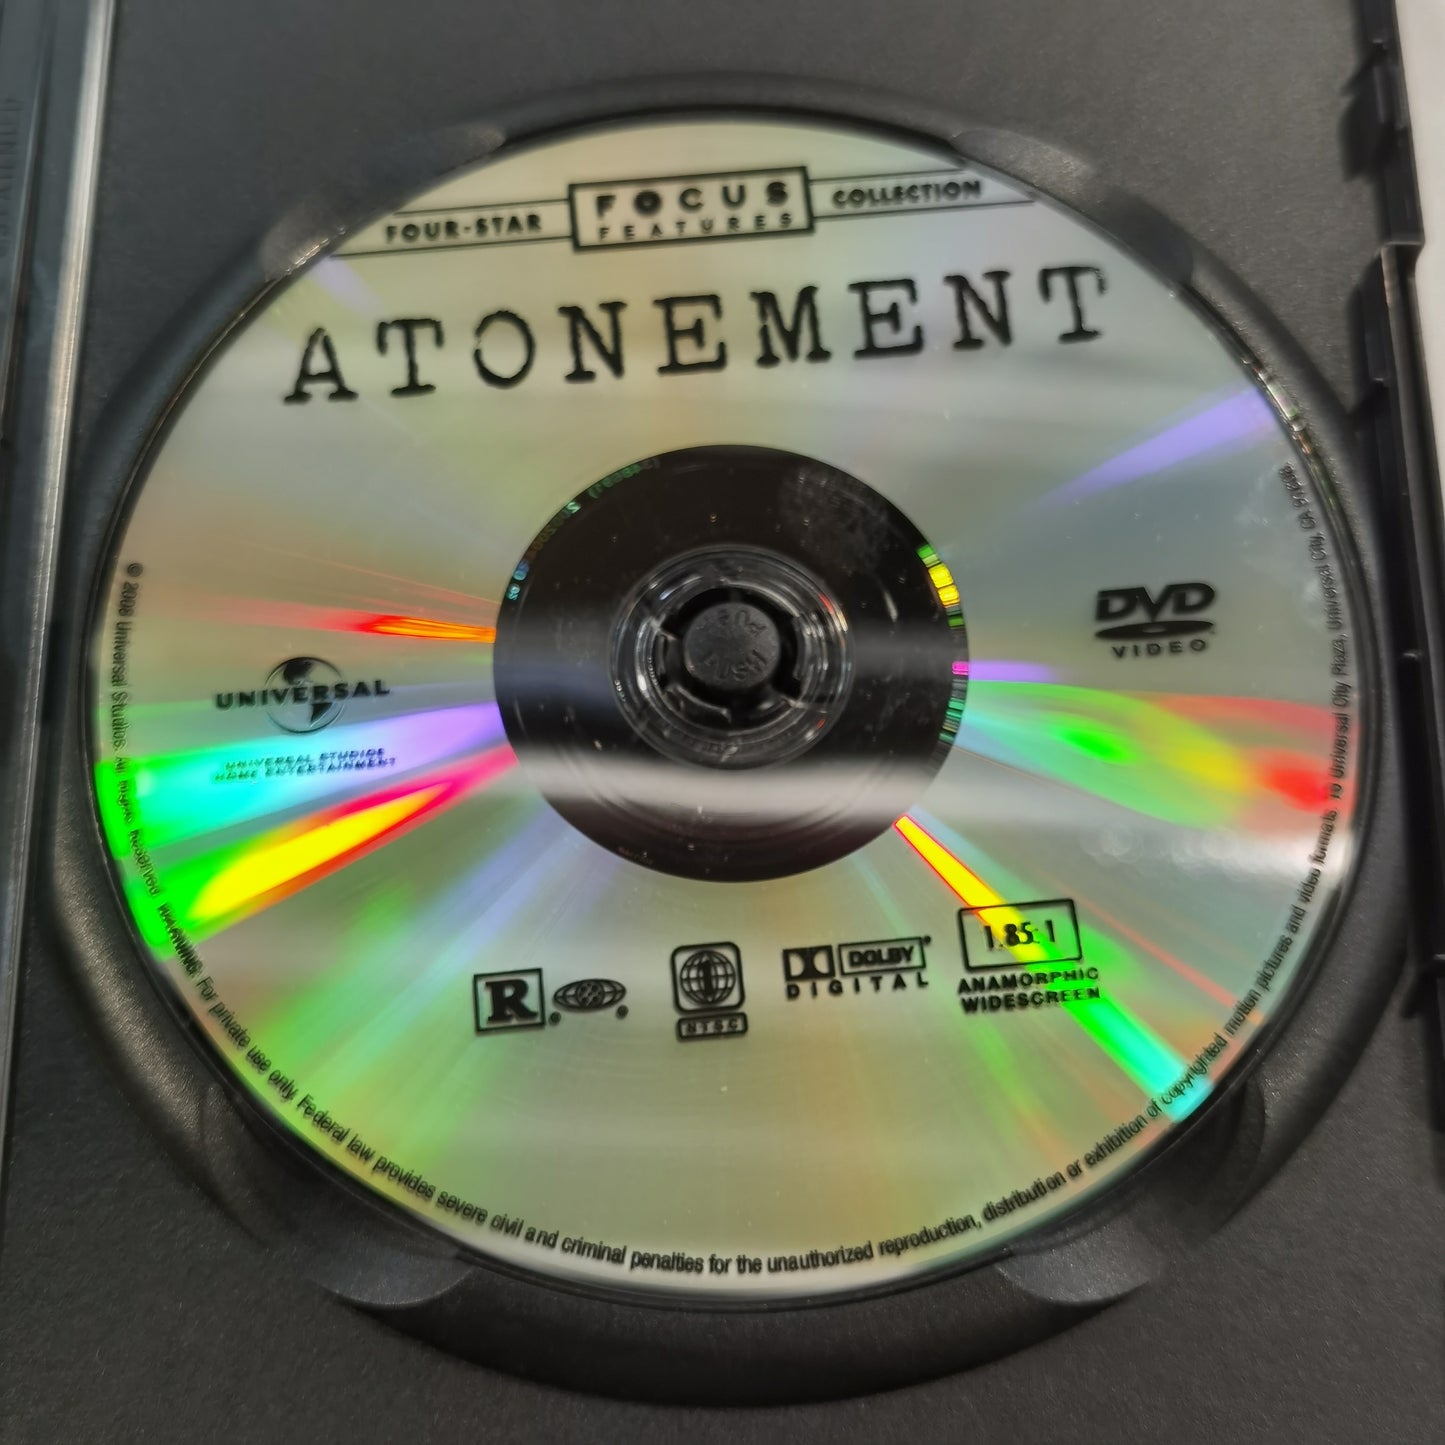 Atonement (2007) - DVD US 2008 Four-Star Collection